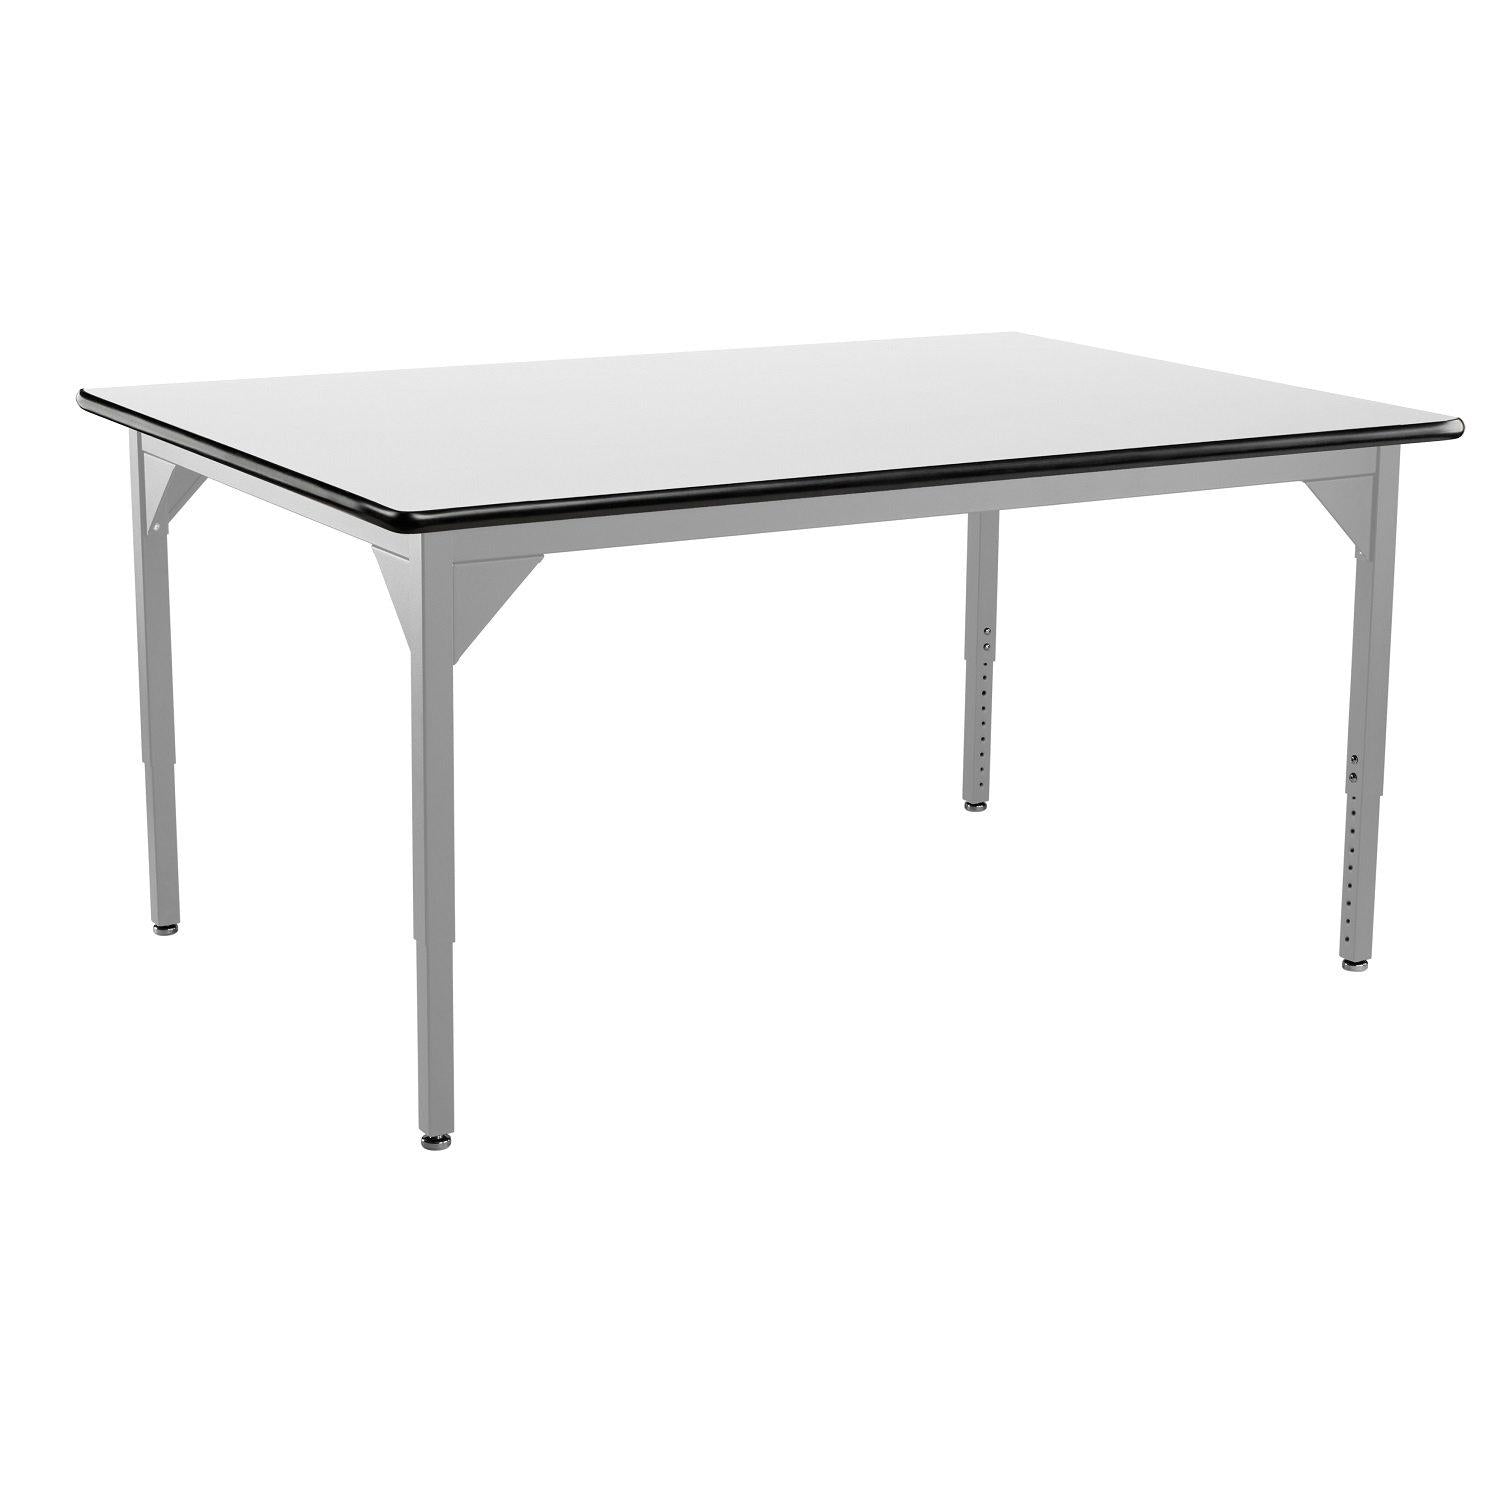 Heavy-Duty Height-Adjustable Utility Table, Soft Grey Frame, 42" x 60", Whiteboard High-Pressure Laminate Top